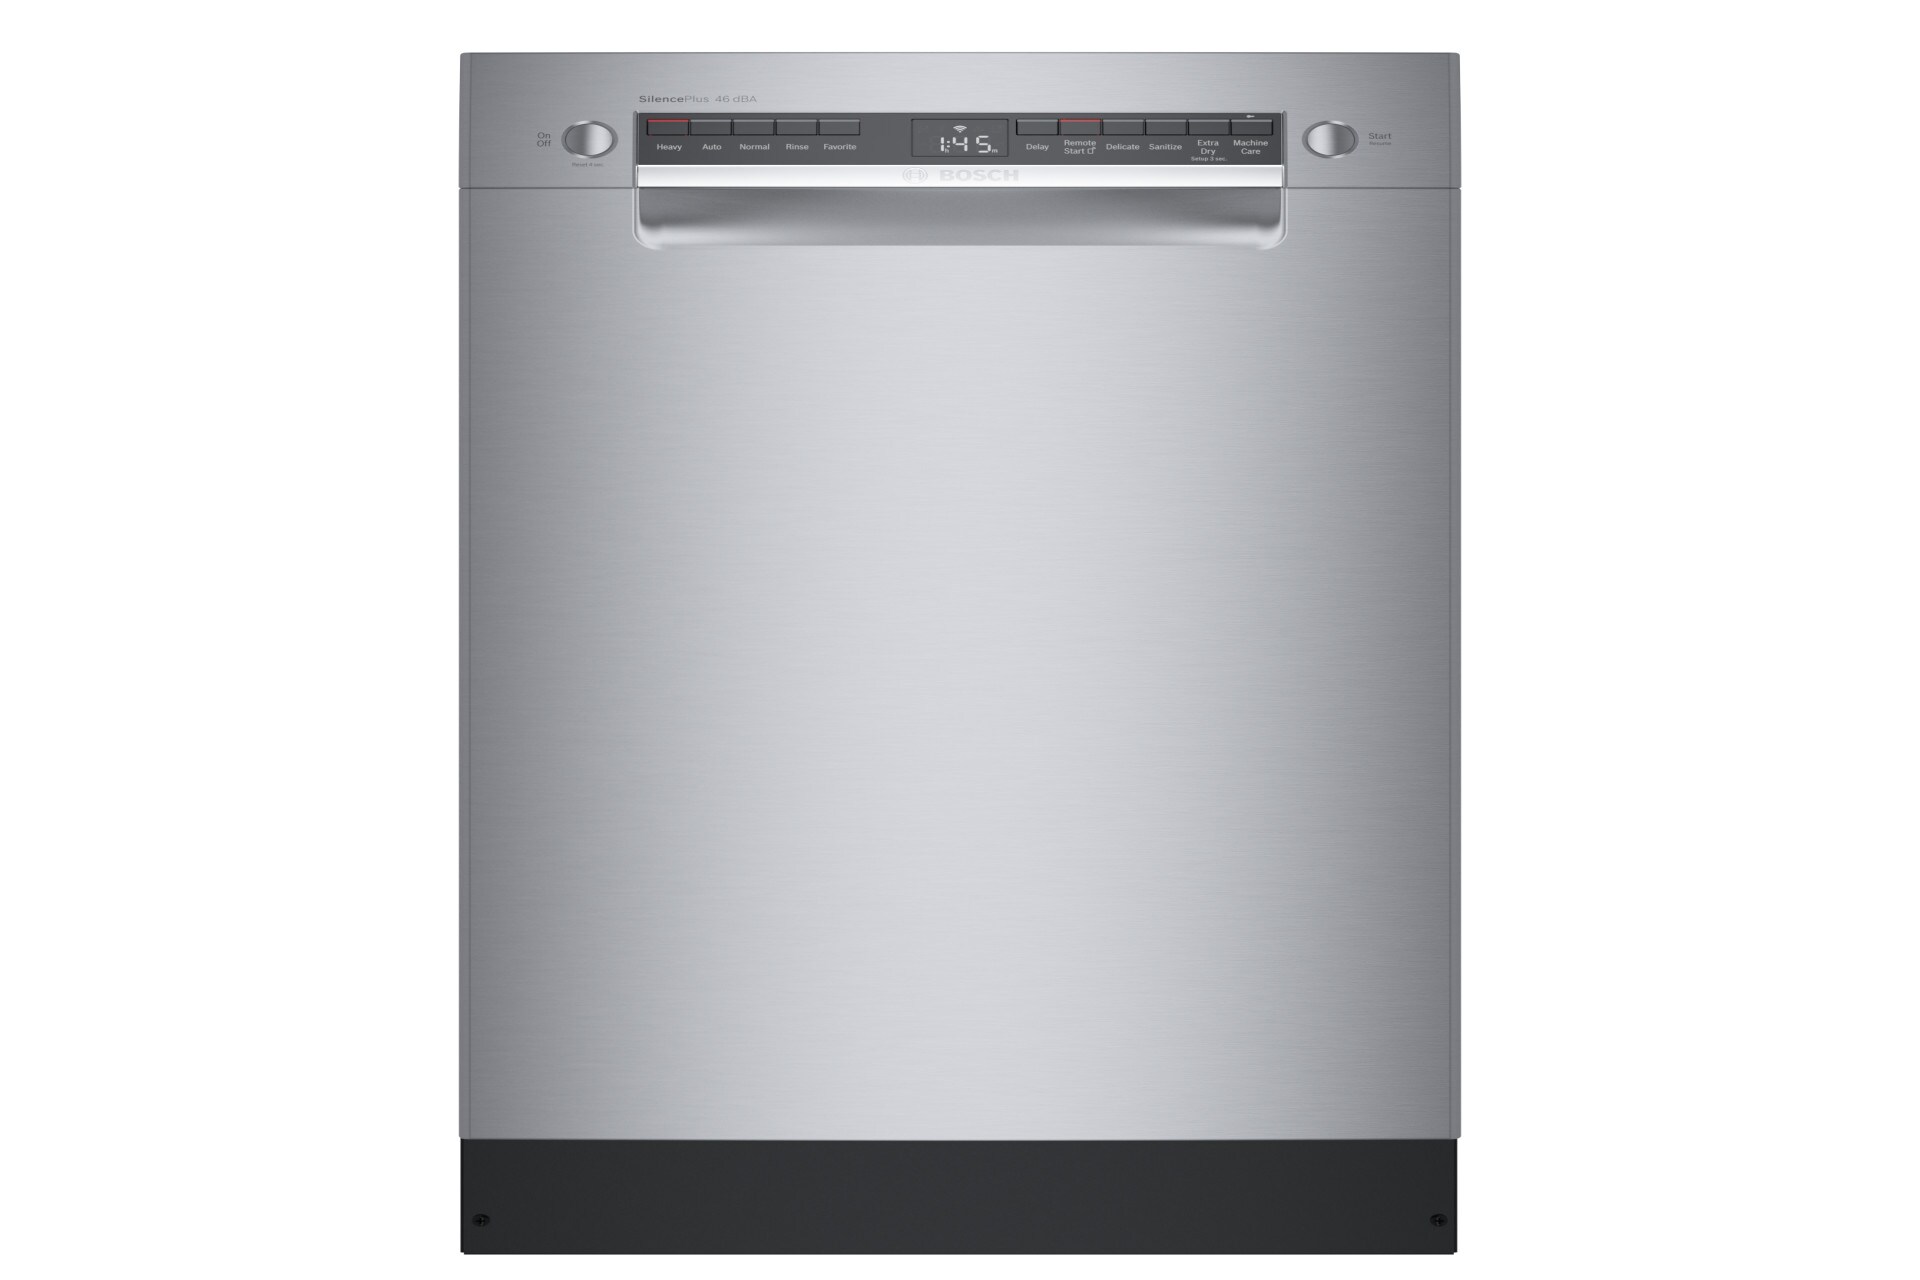 Bosch 300 Series Front Control 18-in Built-In Dishwasher (Stainless Steel) ENERGY STAR, 46-dBA | SPE53B55UC